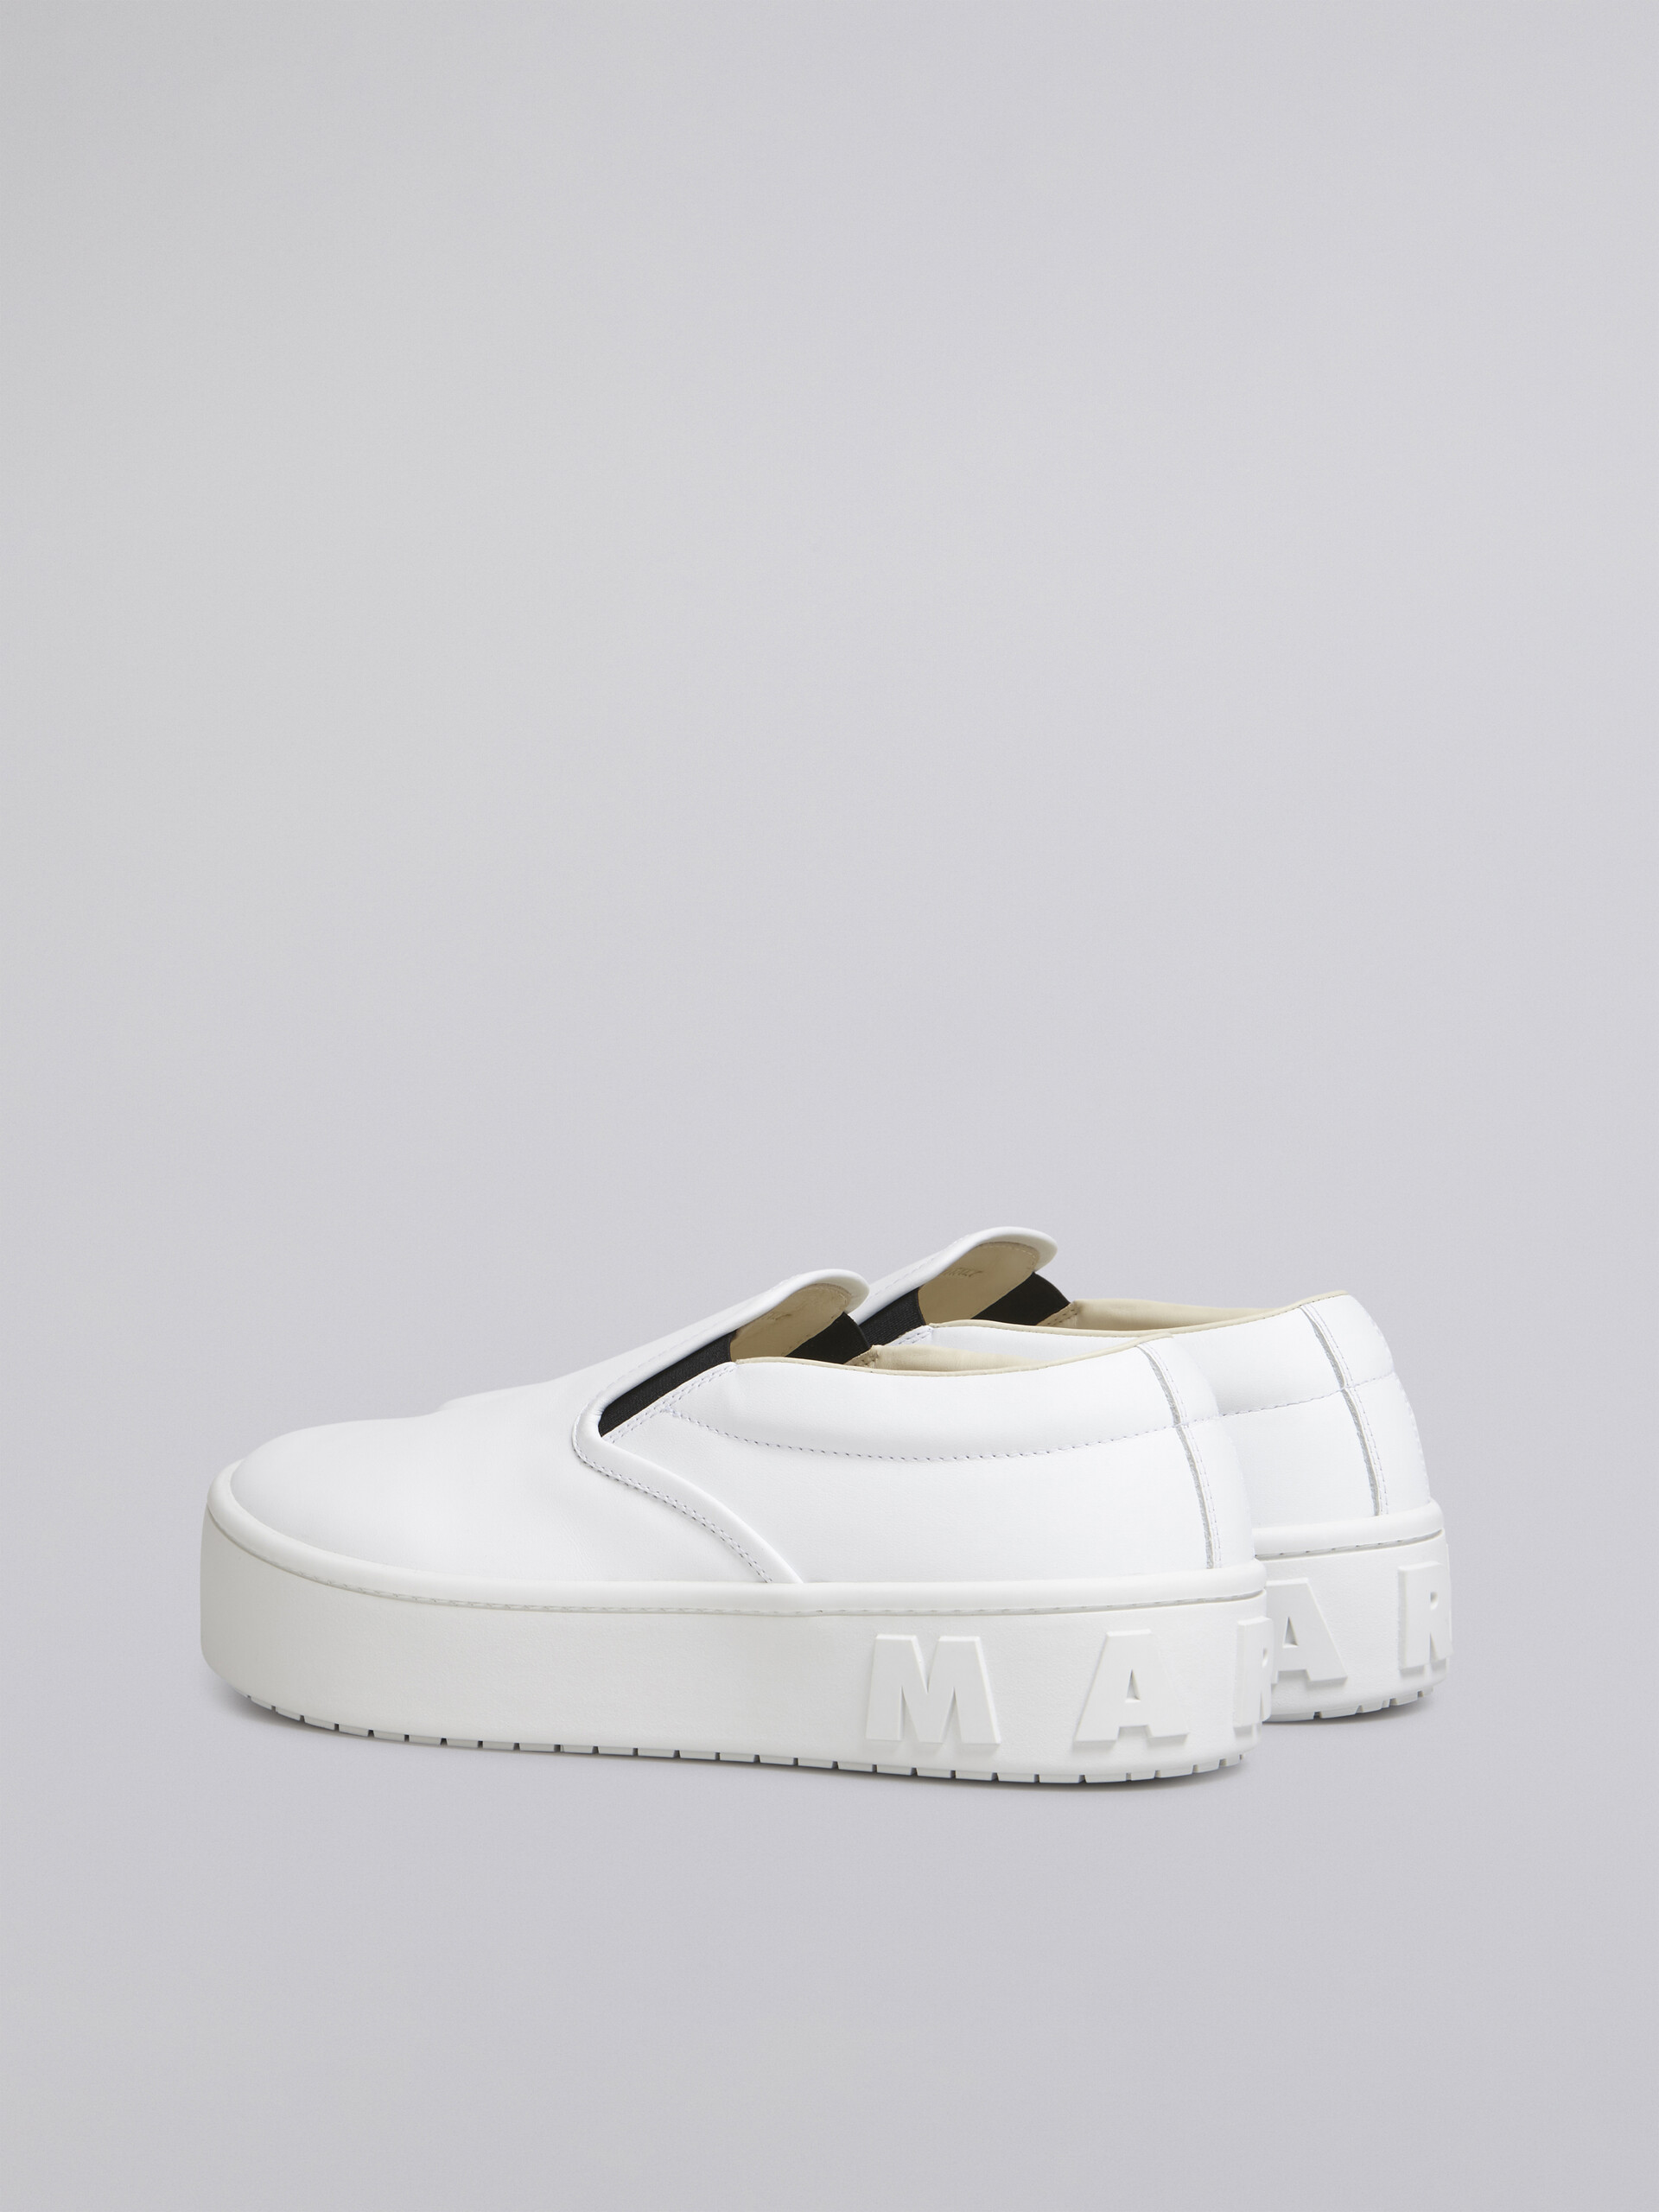 Calfskin slip-on sneaker with maxi logo on the heel - Sneakers - Image 3